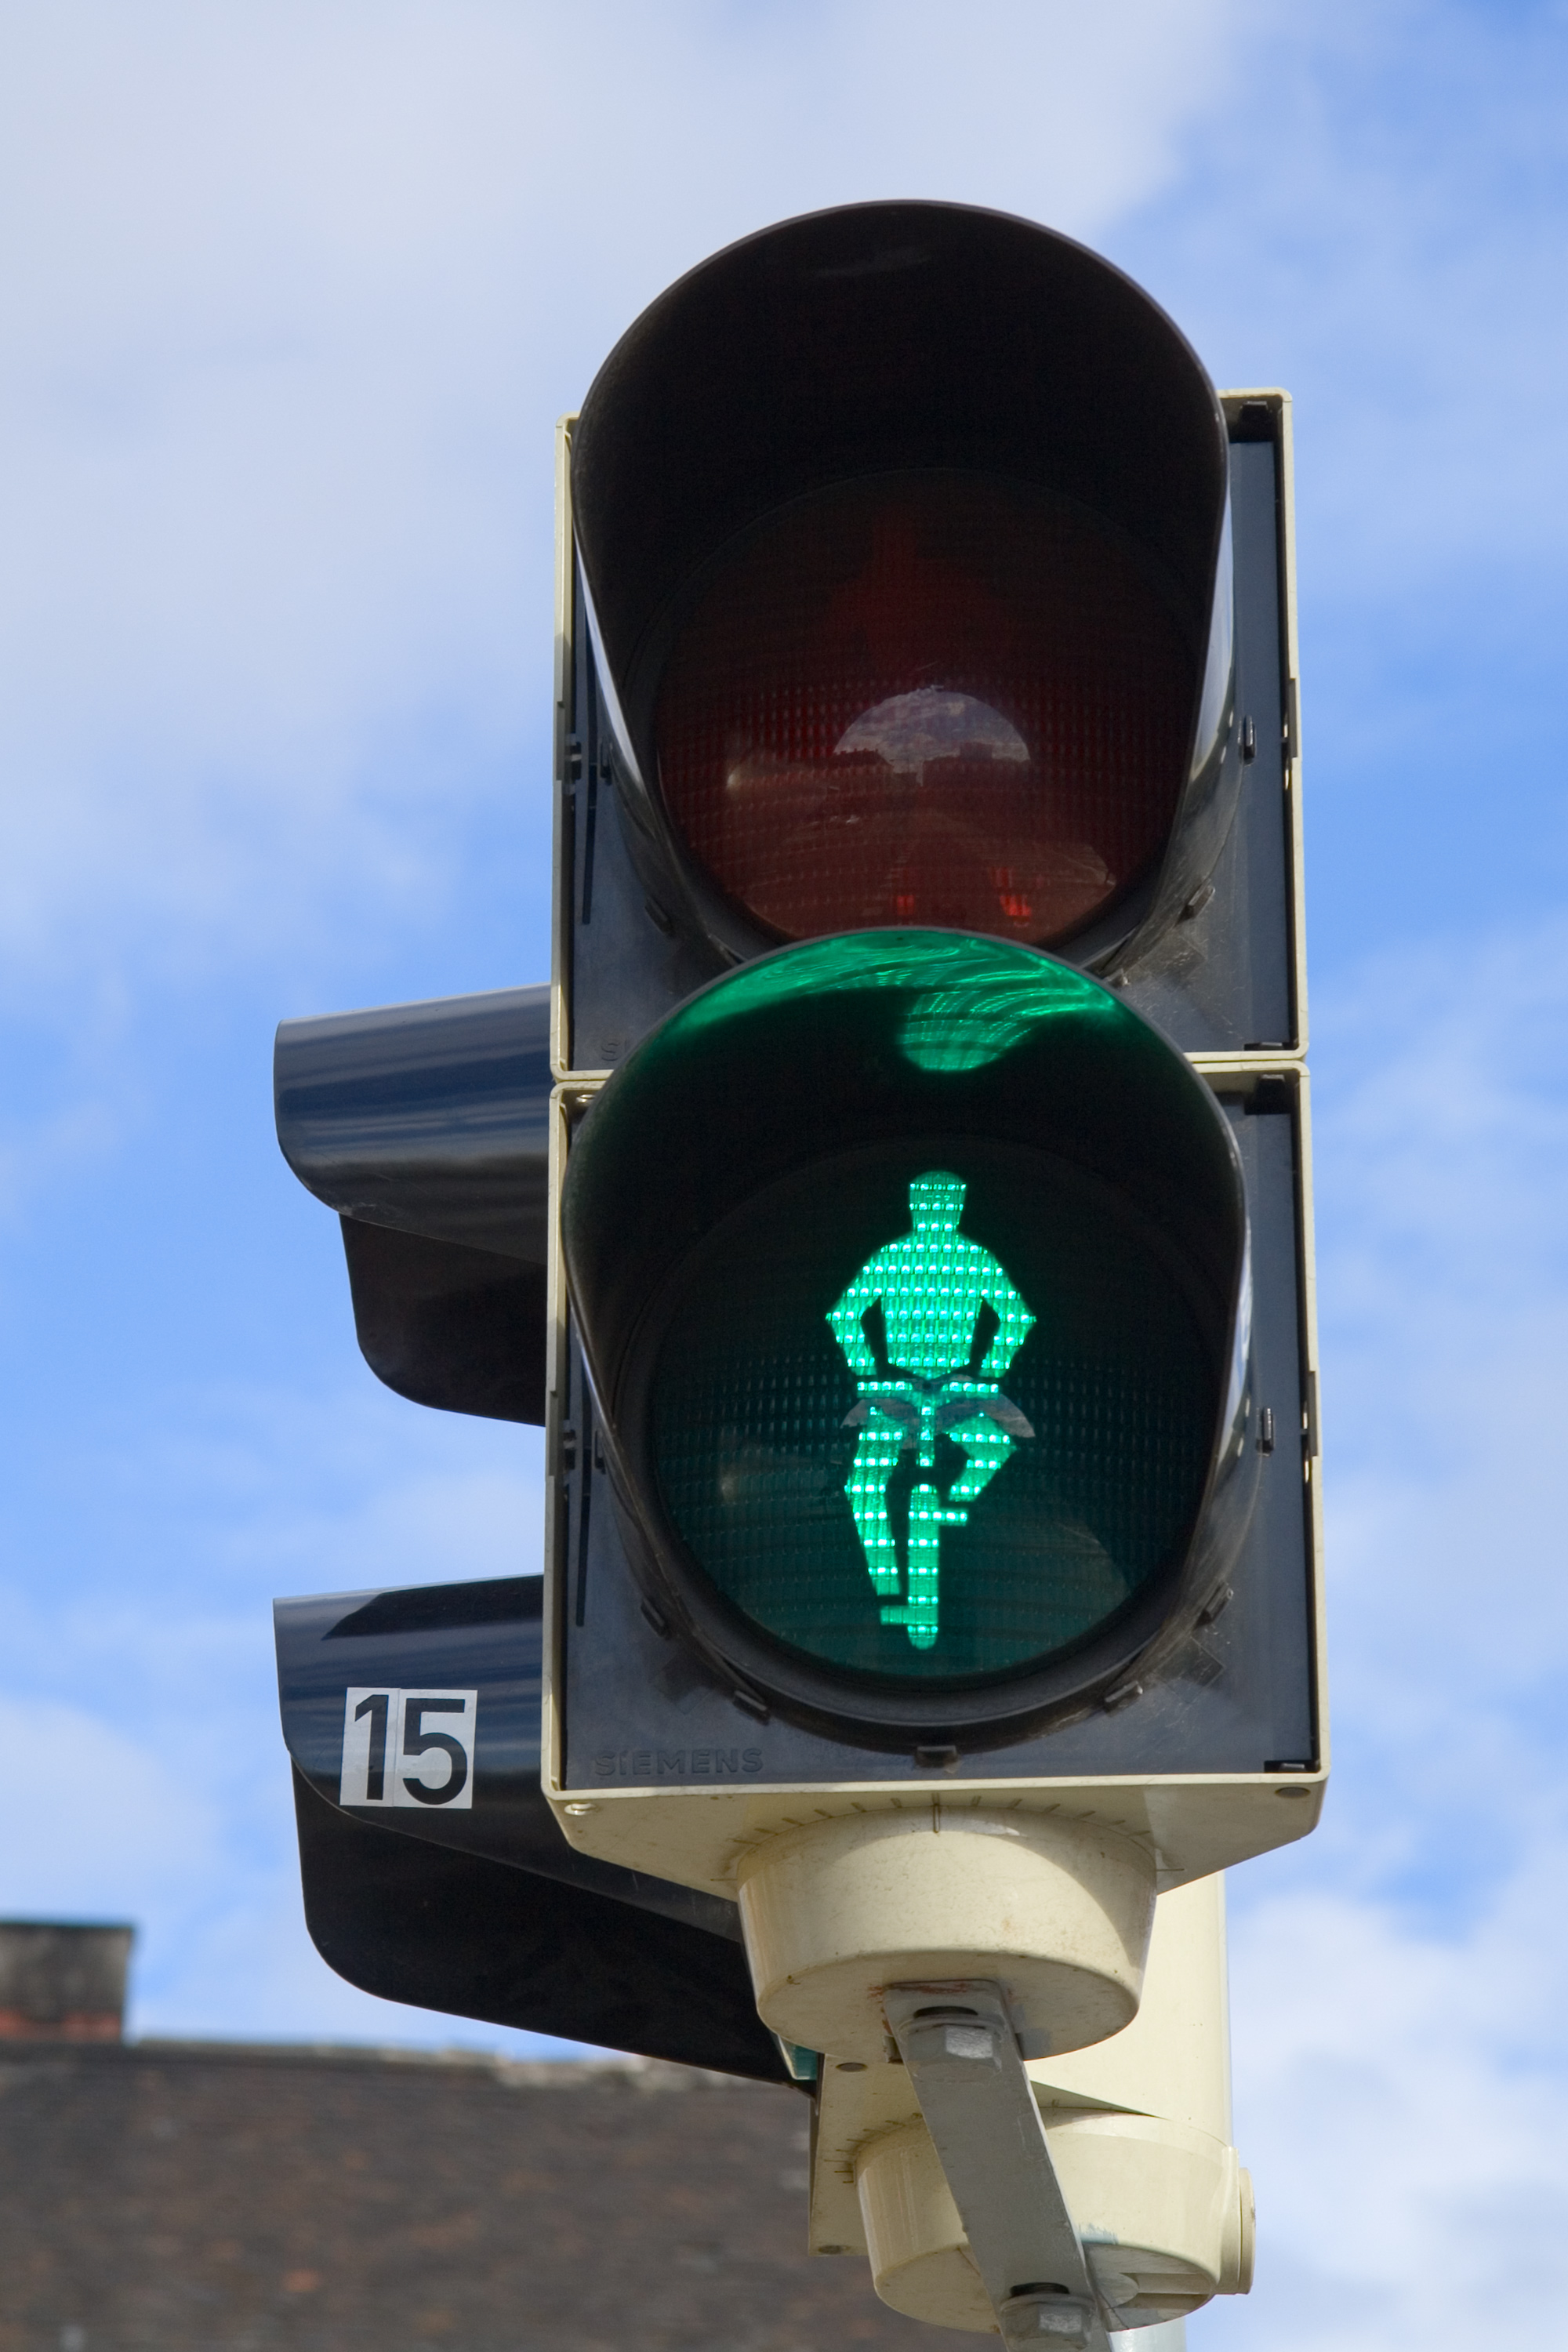 Traffic light for cyclists - green light